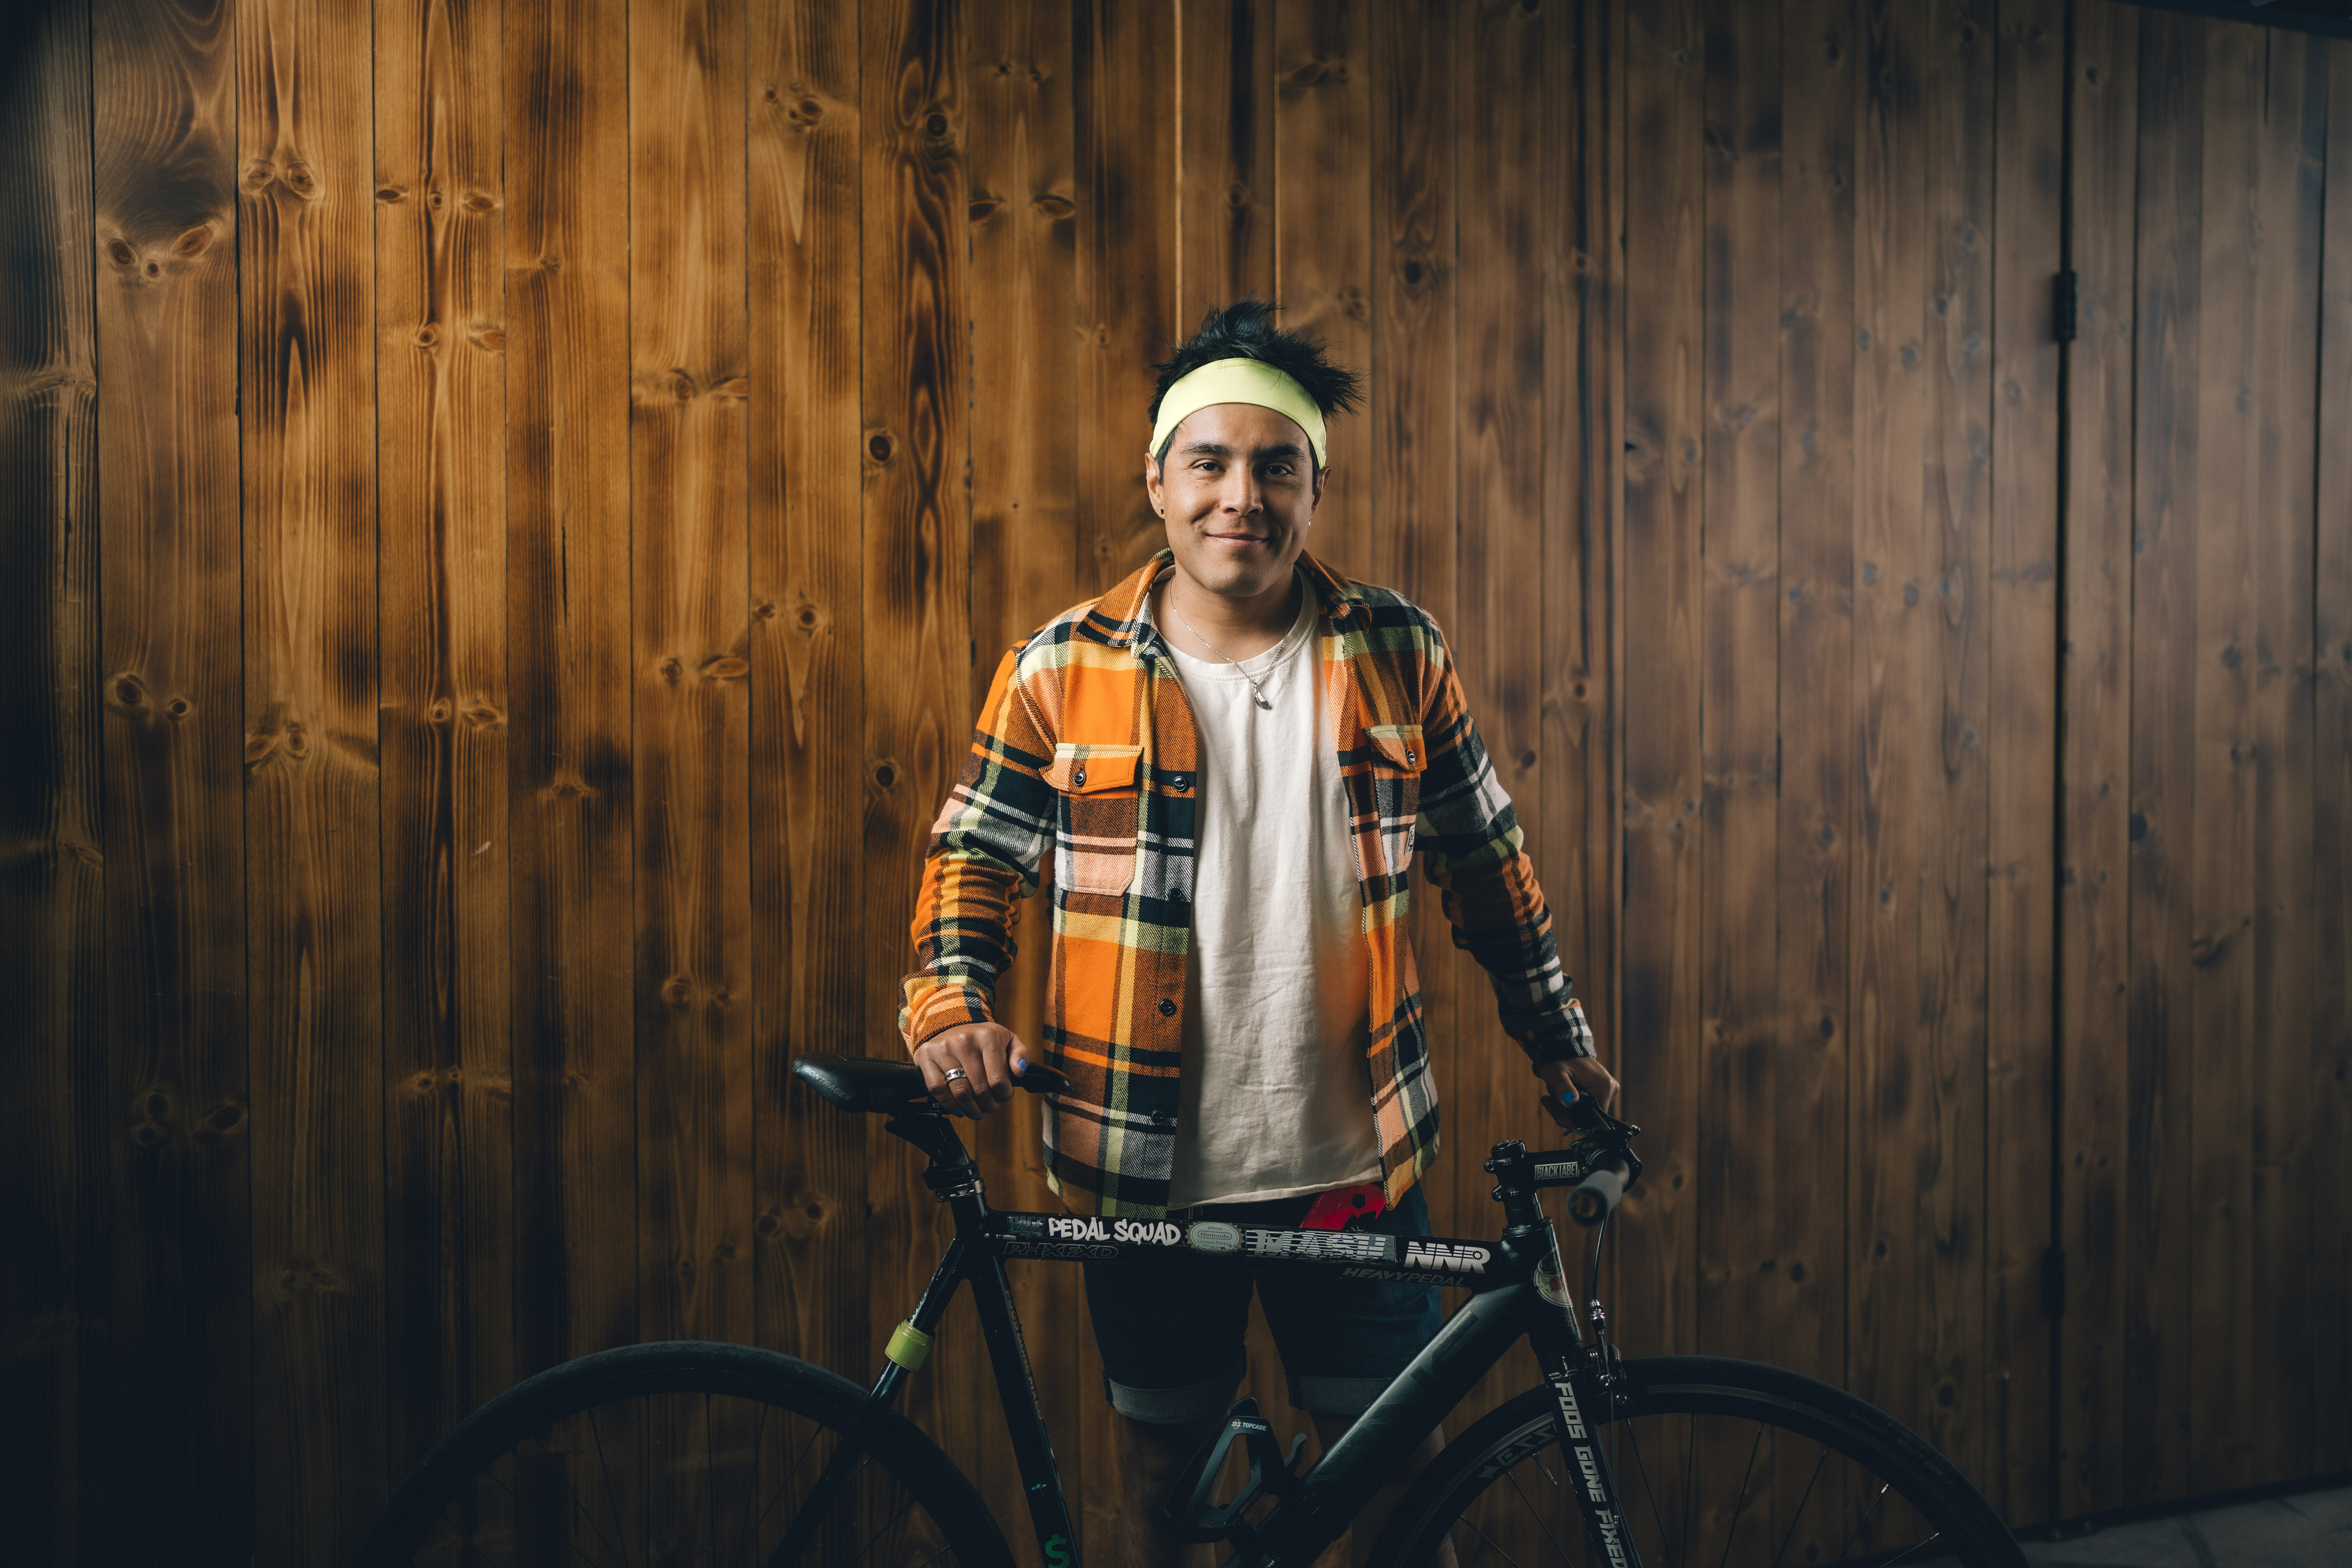 Becket standing in front of a wood paneled wall holding his bike, smiling at the camera